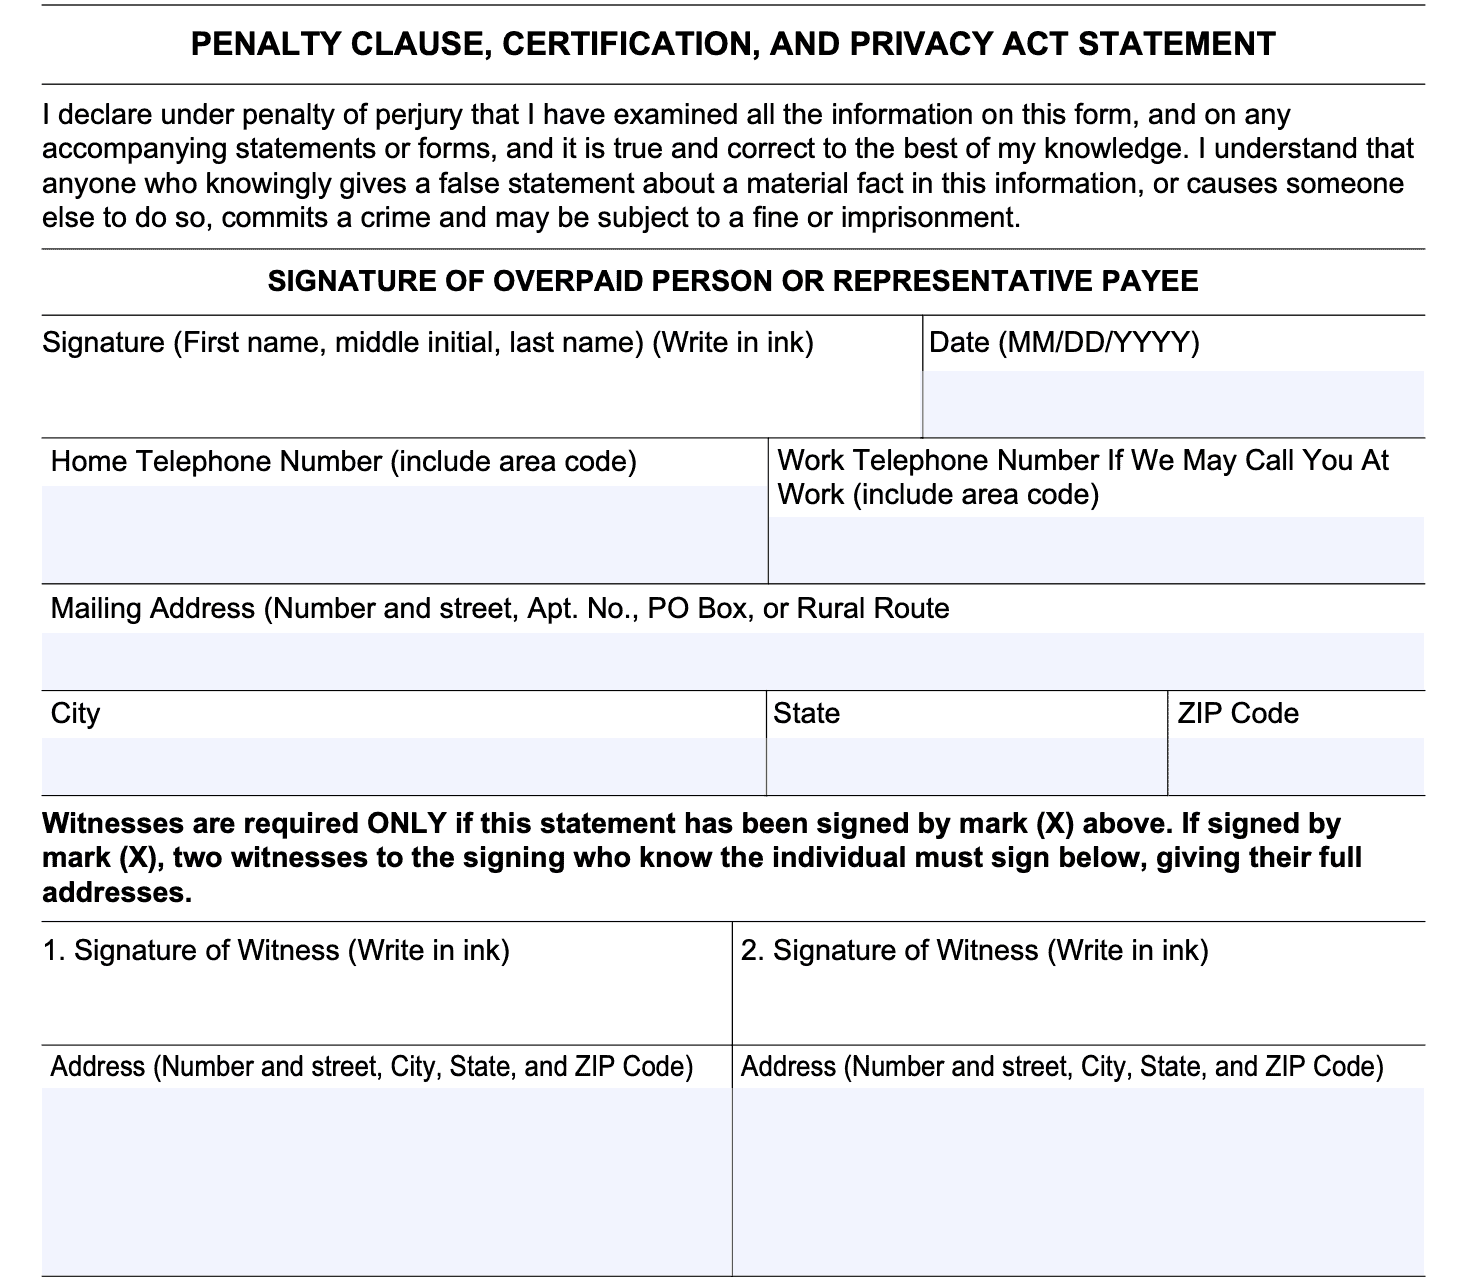 Form SSA-634-BK Penalty clause